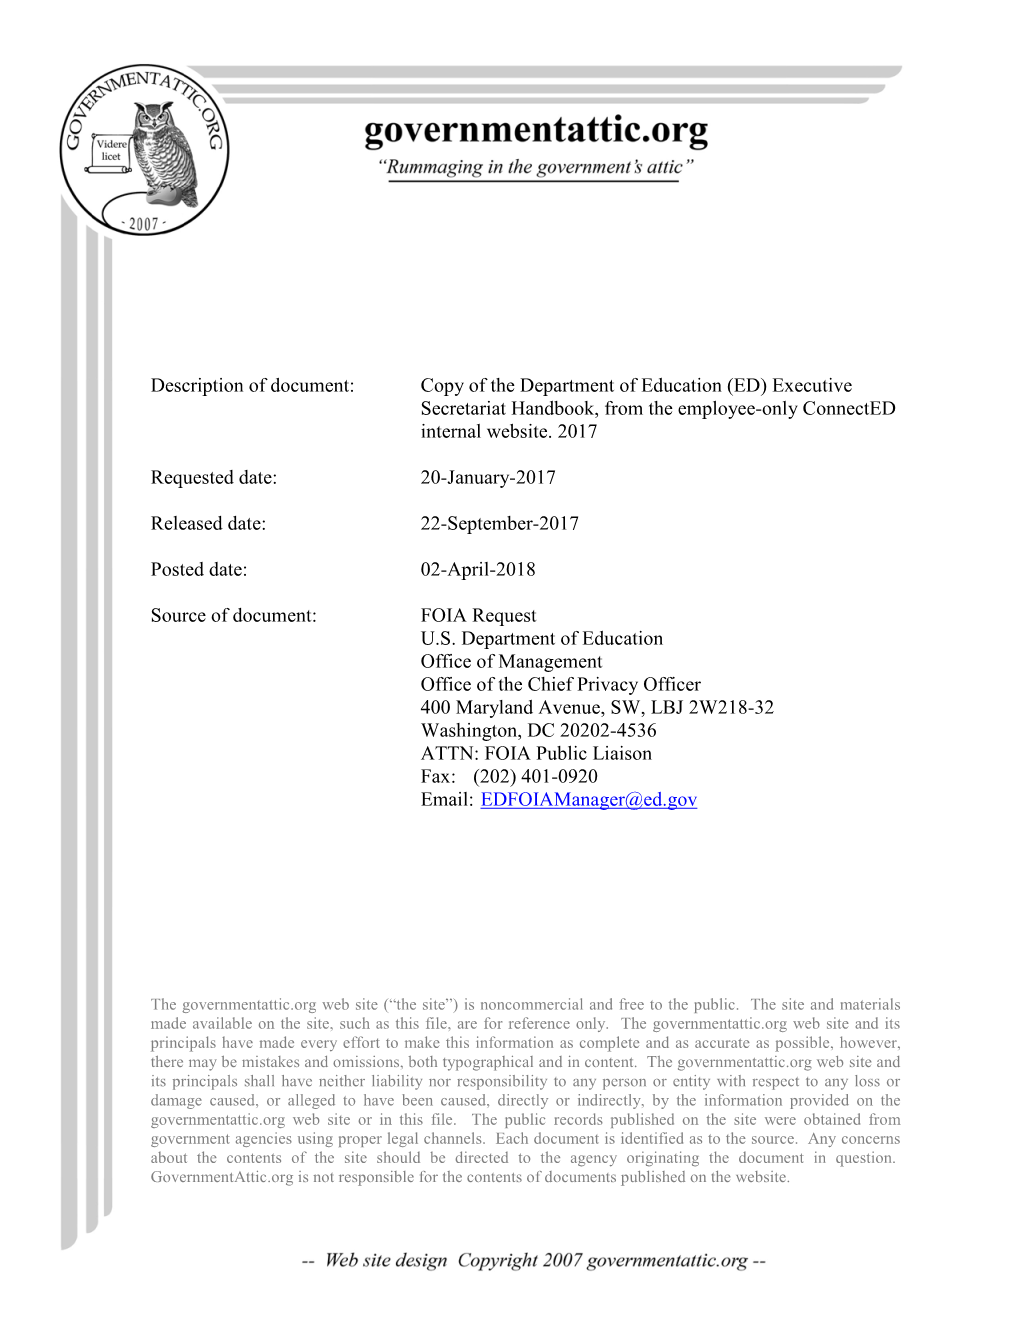 Copy of the Department of Education (ED) Executive Secretariat Handbook, from the Employee-Only Connected Internal Website